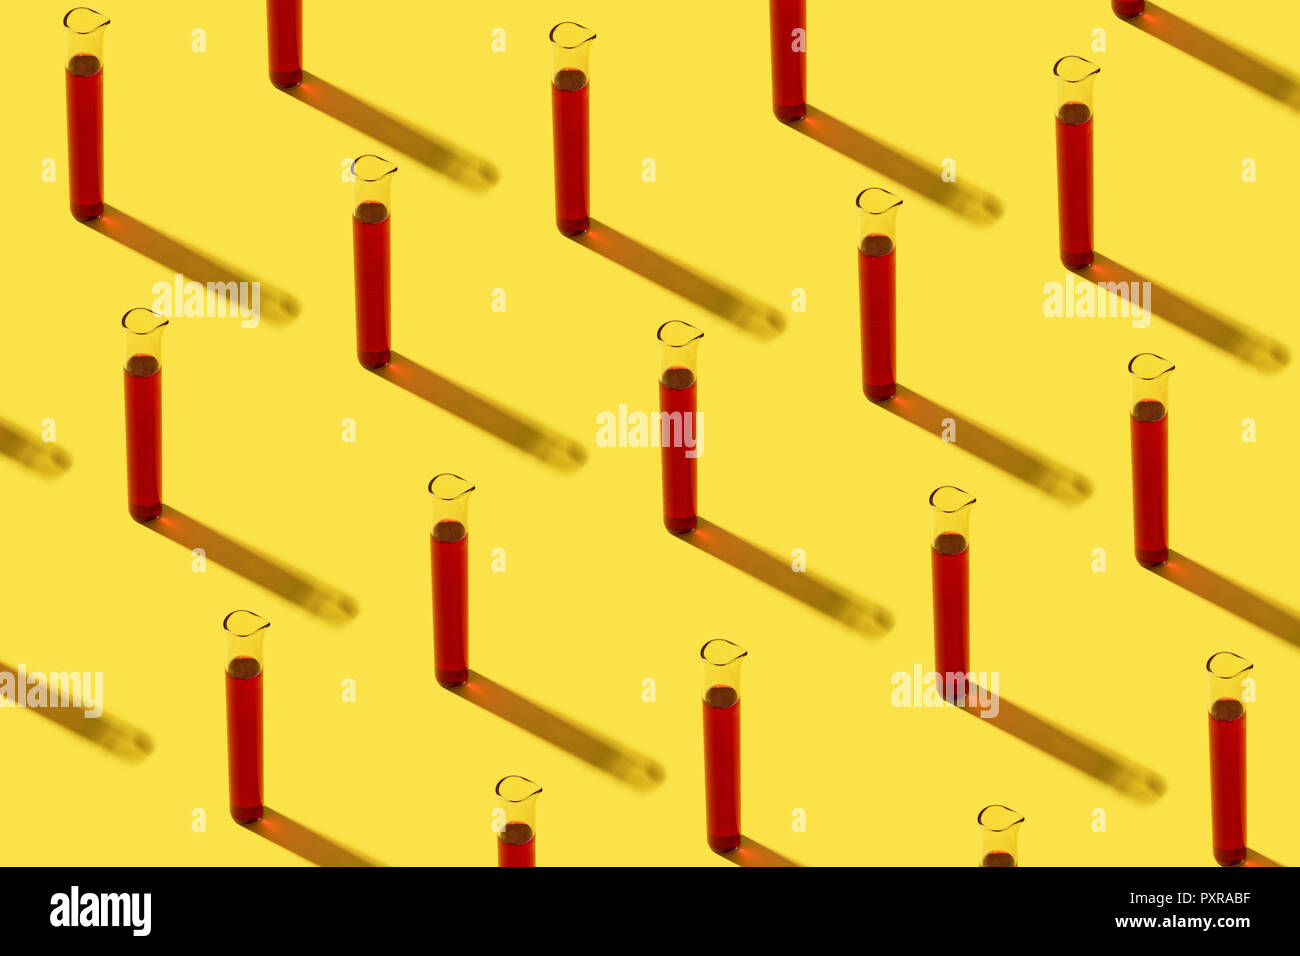 Row of test tubes with red liquid, yellow background Stock Photo